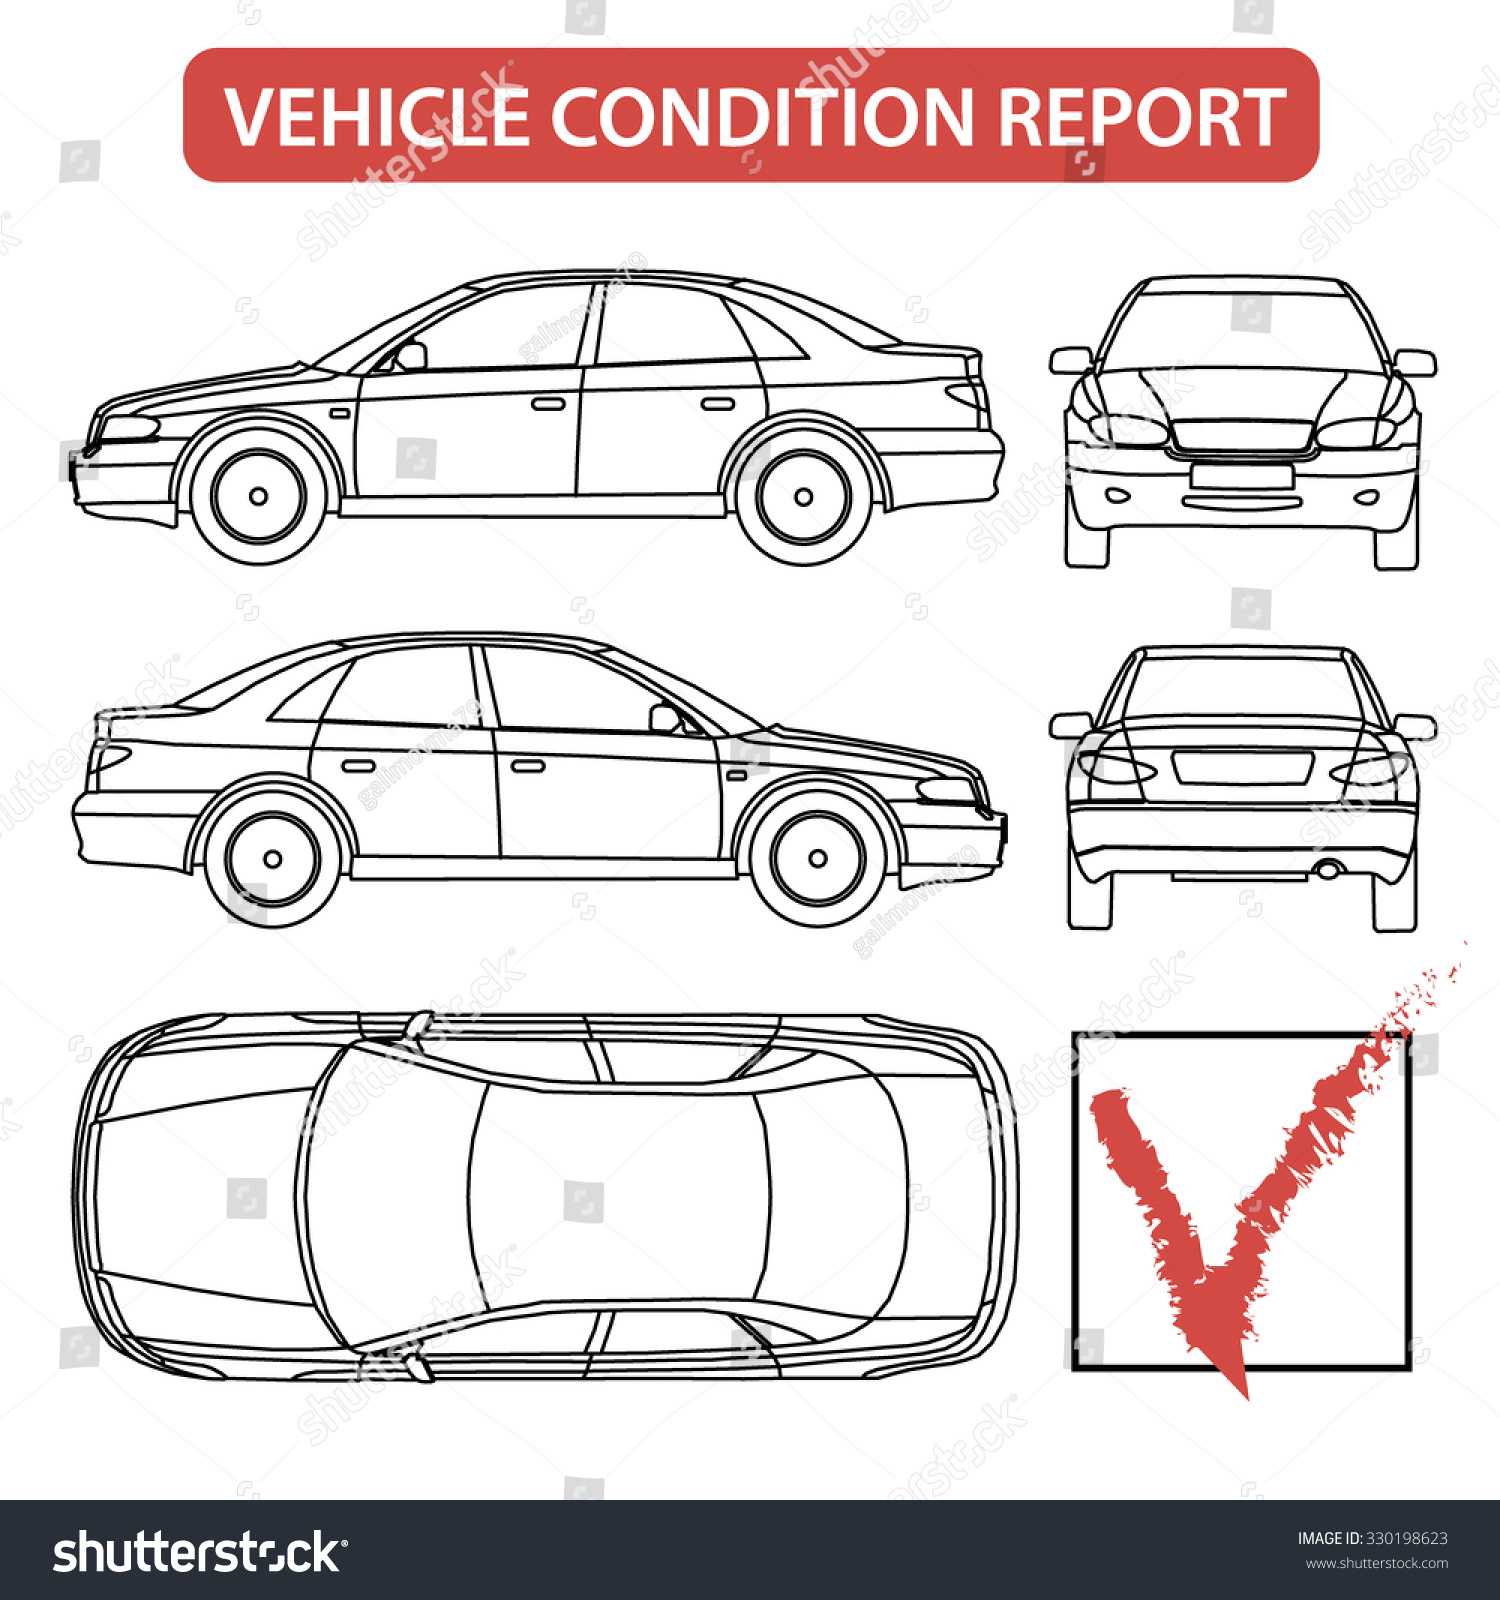 Car Condition Form Vehicle Checklist Auto Stock Vector Intended For Truck Condition Report Template